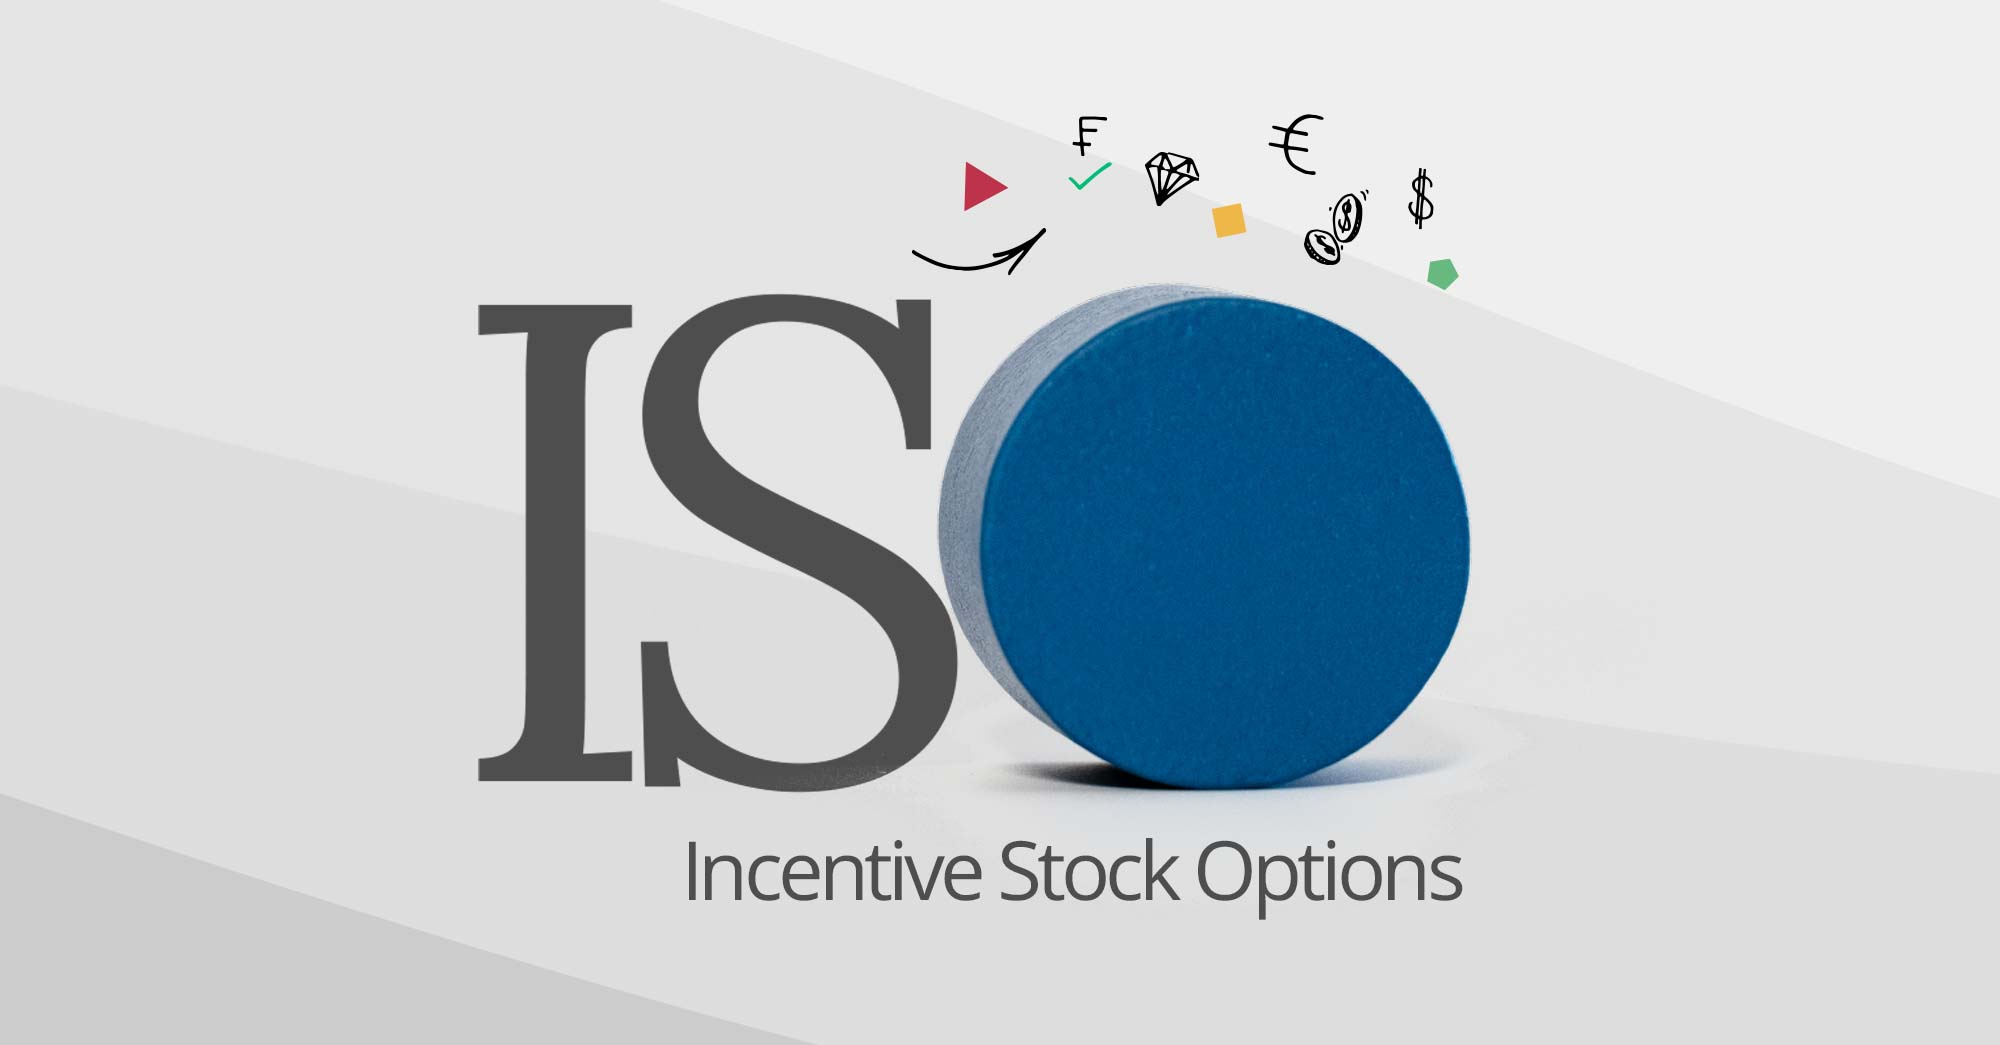 Incentive Stock Options (ISOs) – what’s the deal?